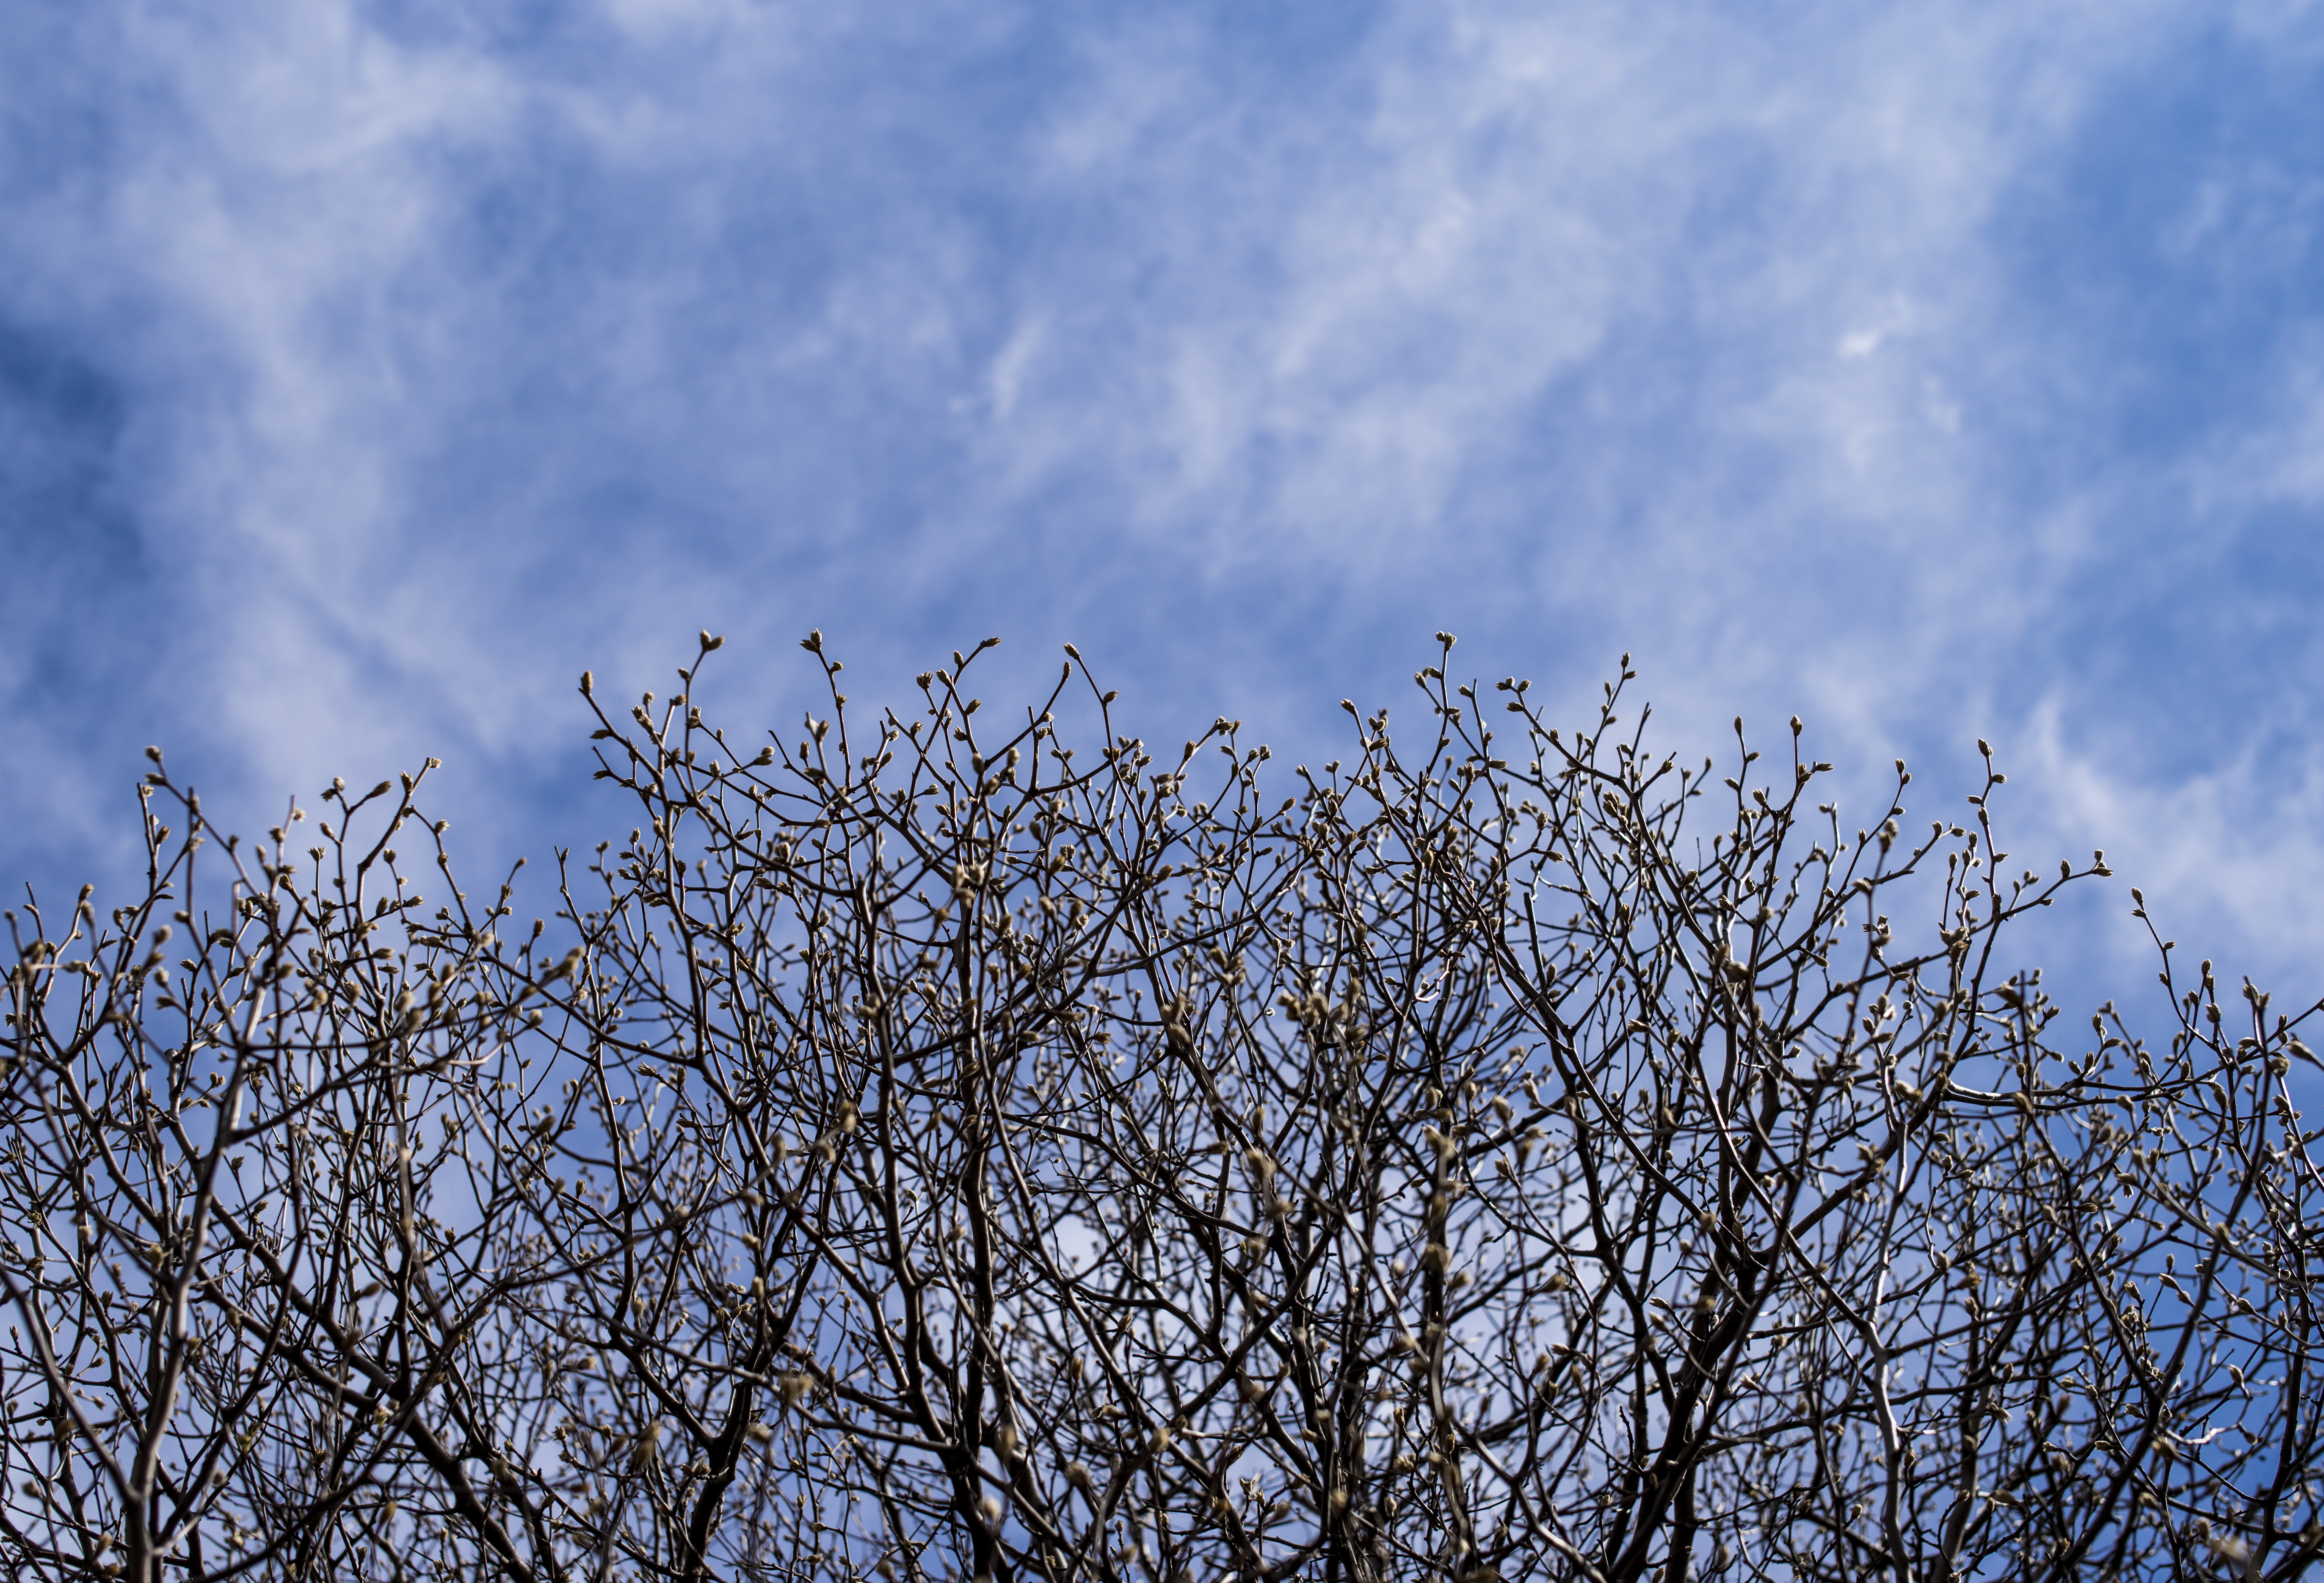 The top branches of the Survivor Tree begin to bloom on a partly sunny day at the Memorial. A blue sky and some passing clouds are visible in the background.